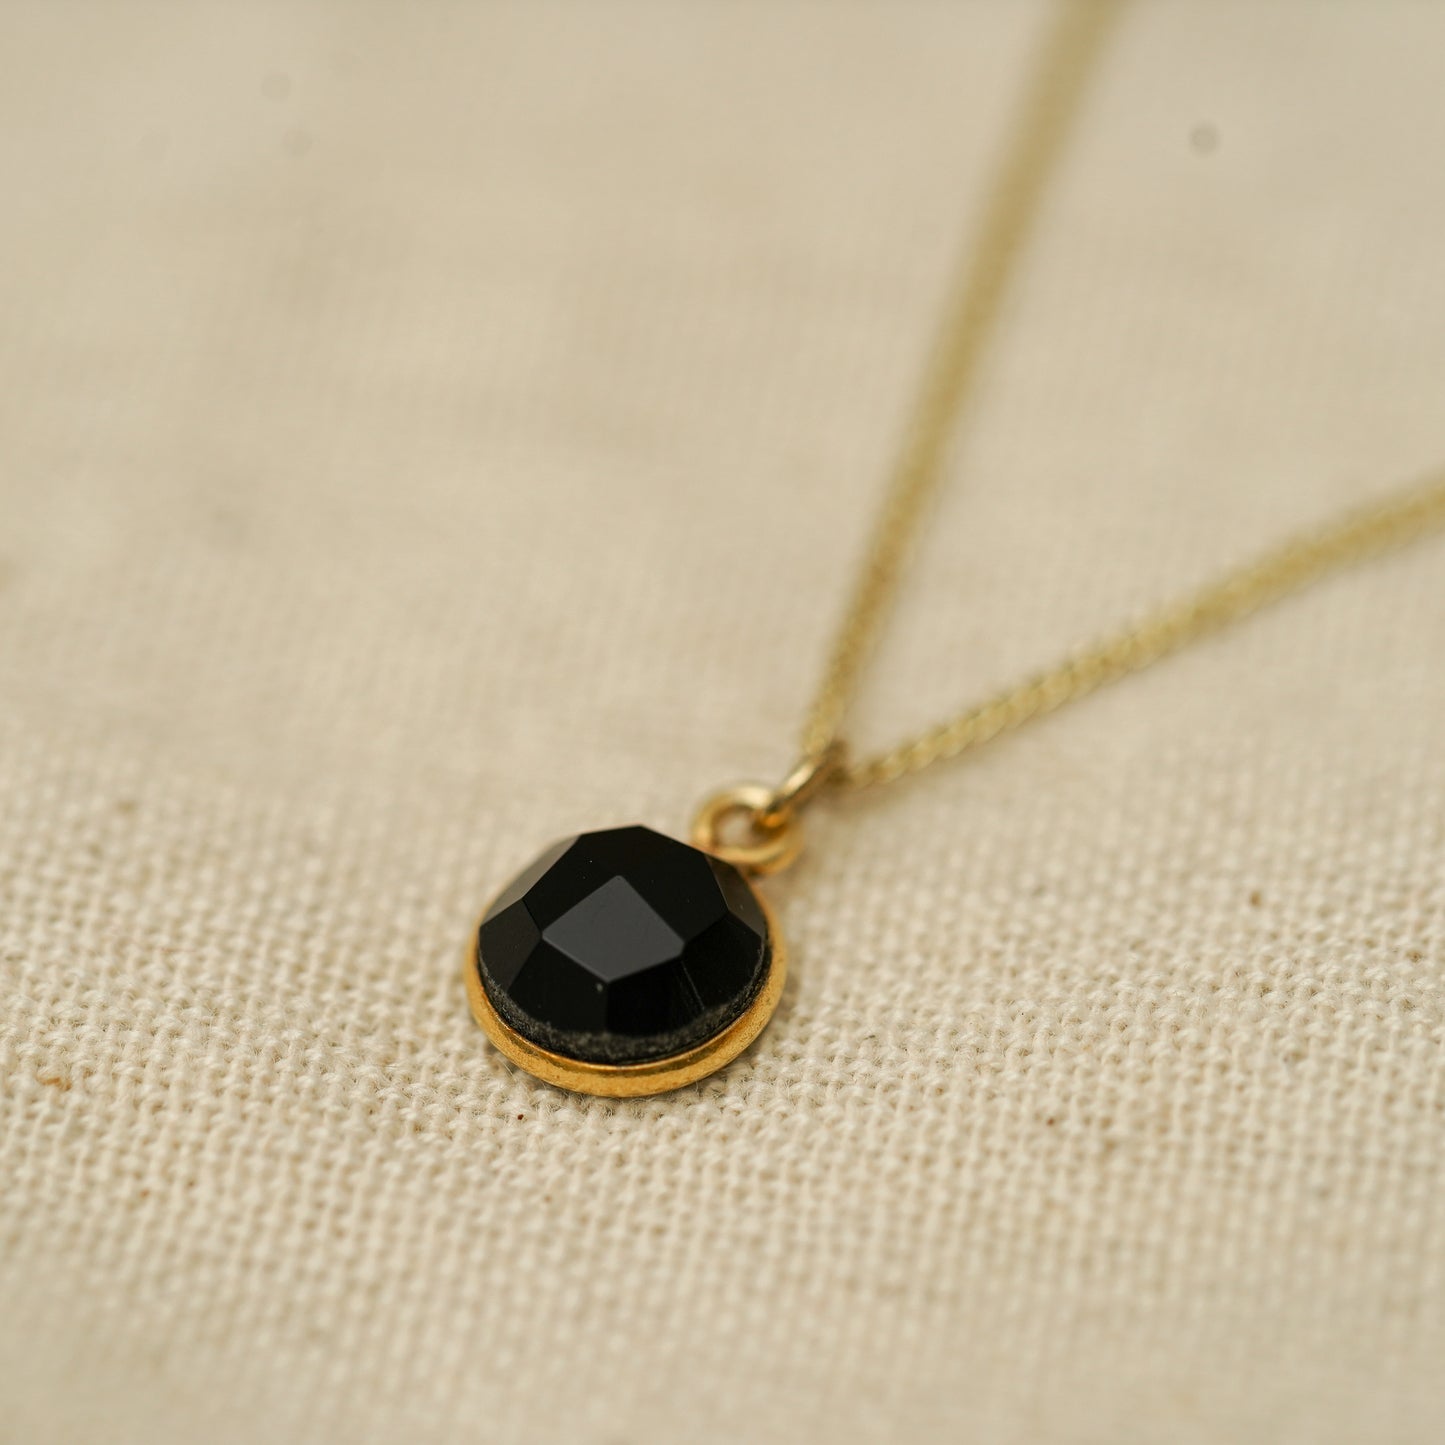 Gold Chain Necklace with Gemstone Pendant